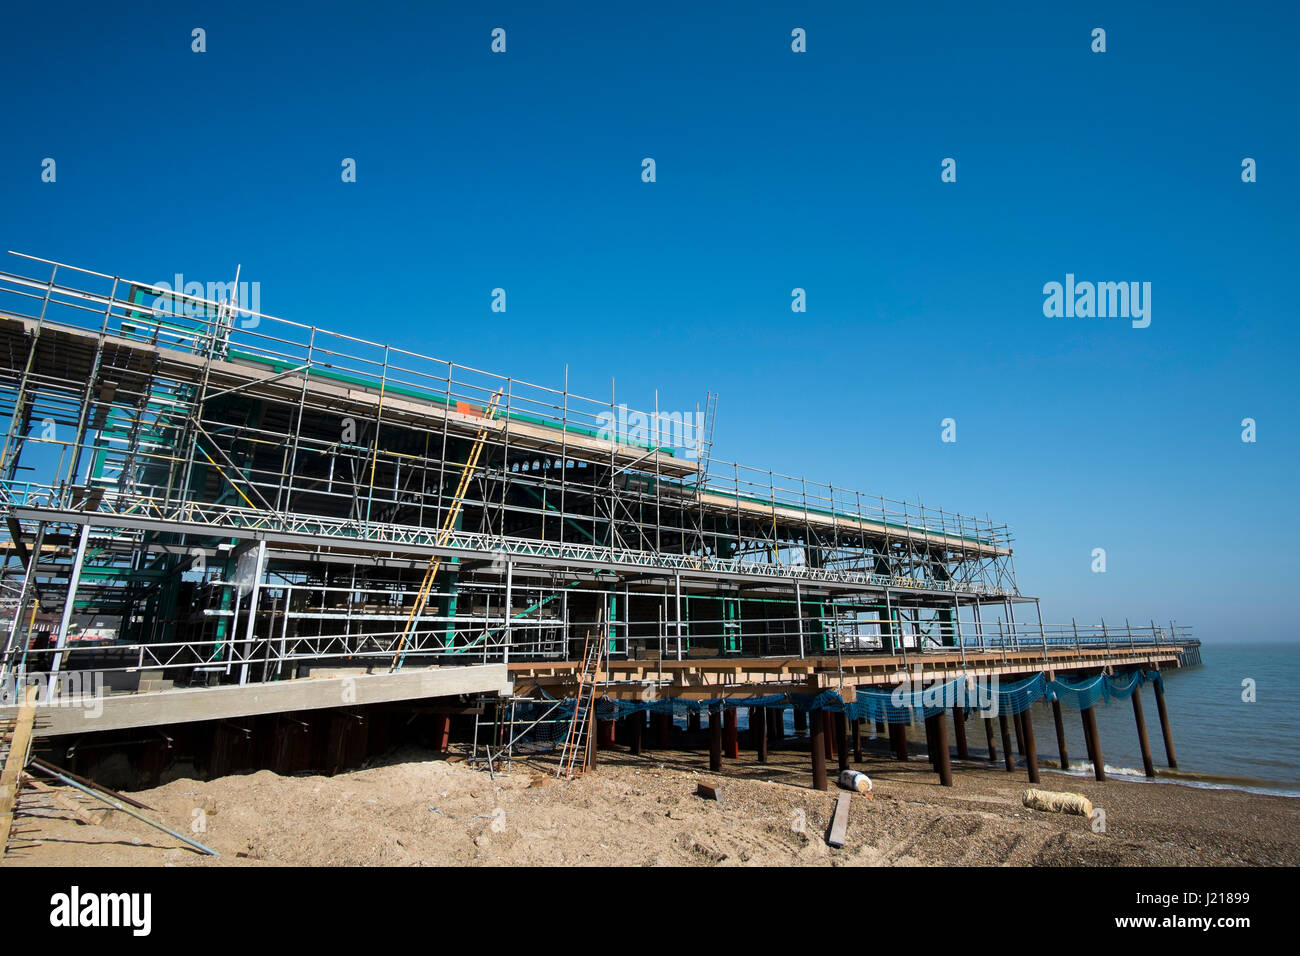 Building work being carried out on the pier in Felixstowe, Suffolk Stock Photo